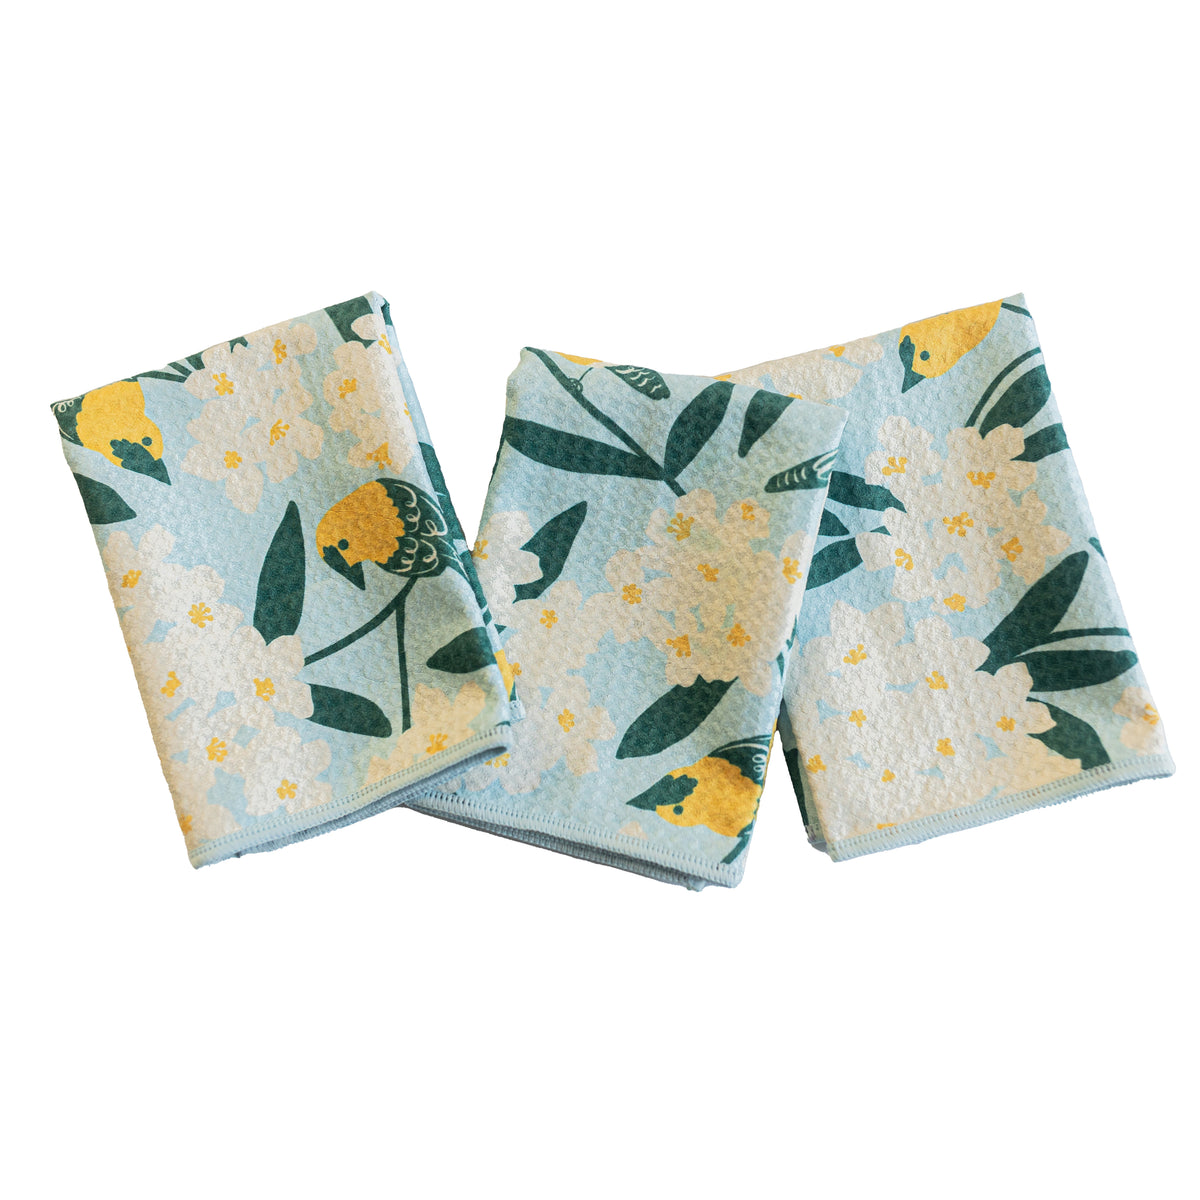 Mighty Mini Towel (Set of 3) - Nuthatch Birdsong kitchen towels Once Again Home Co.   